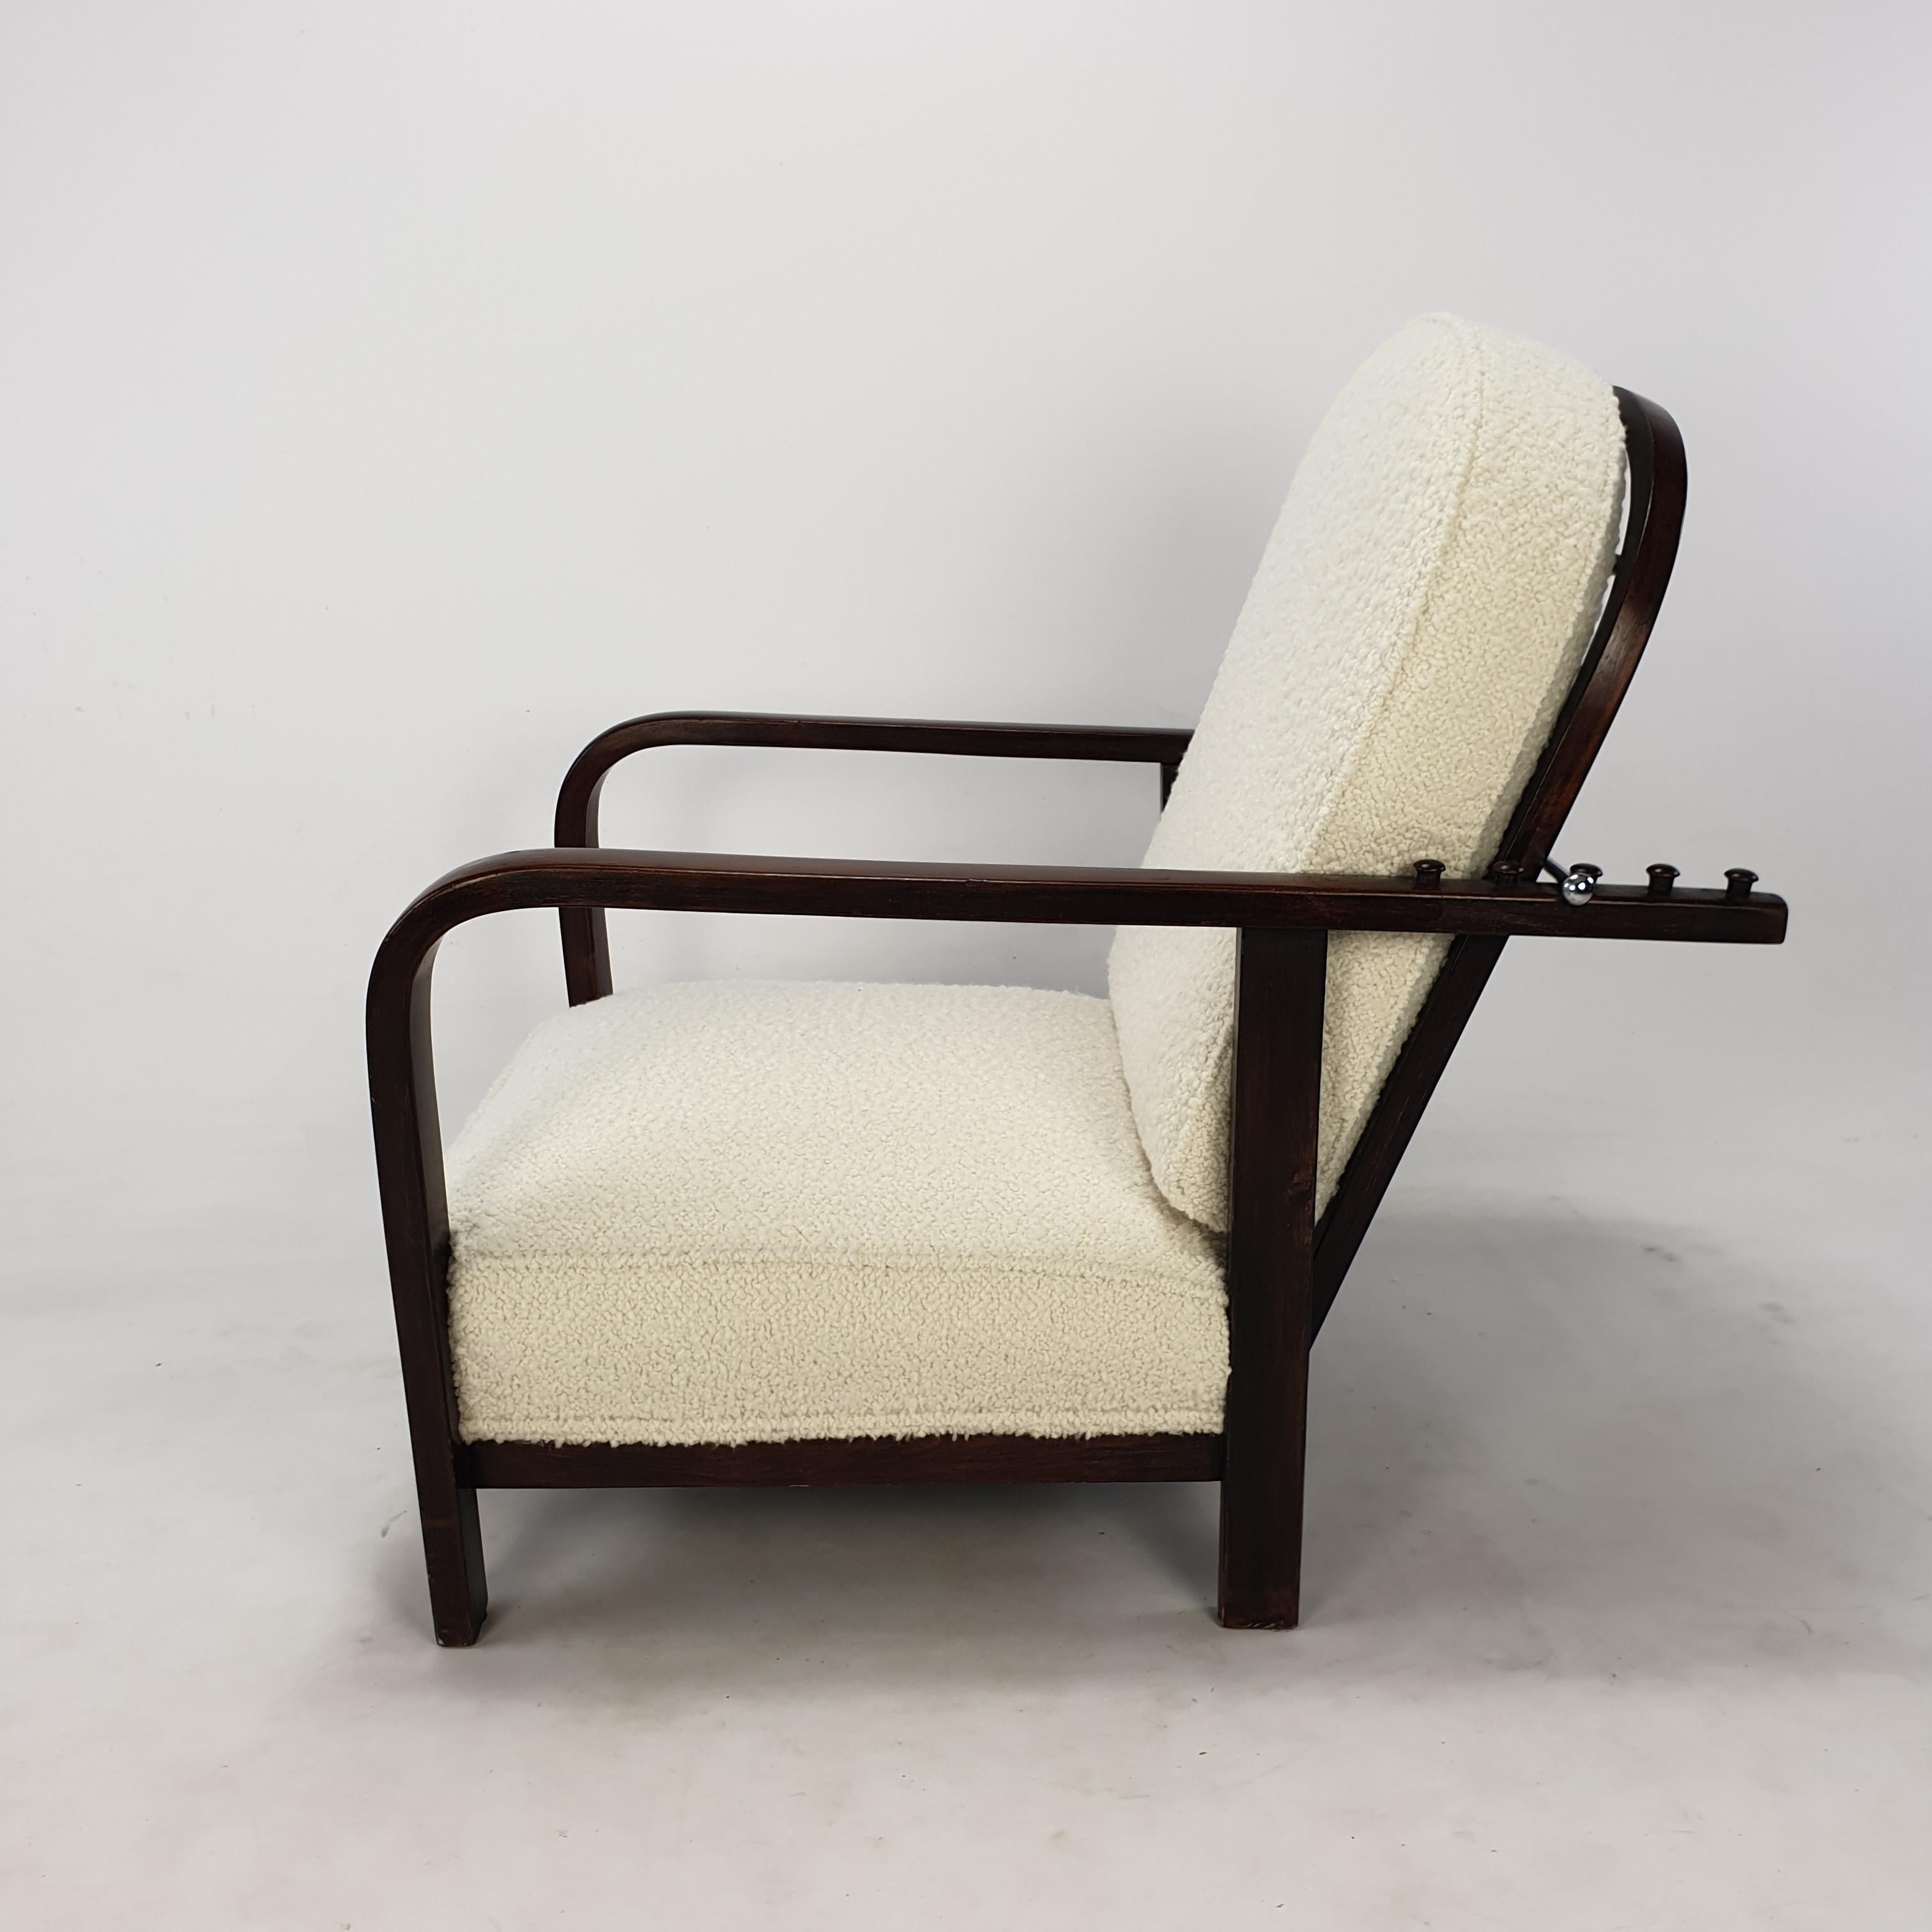 Pair of Adjustable Lounge Chairs by Thonet, 1930's For Sale 4